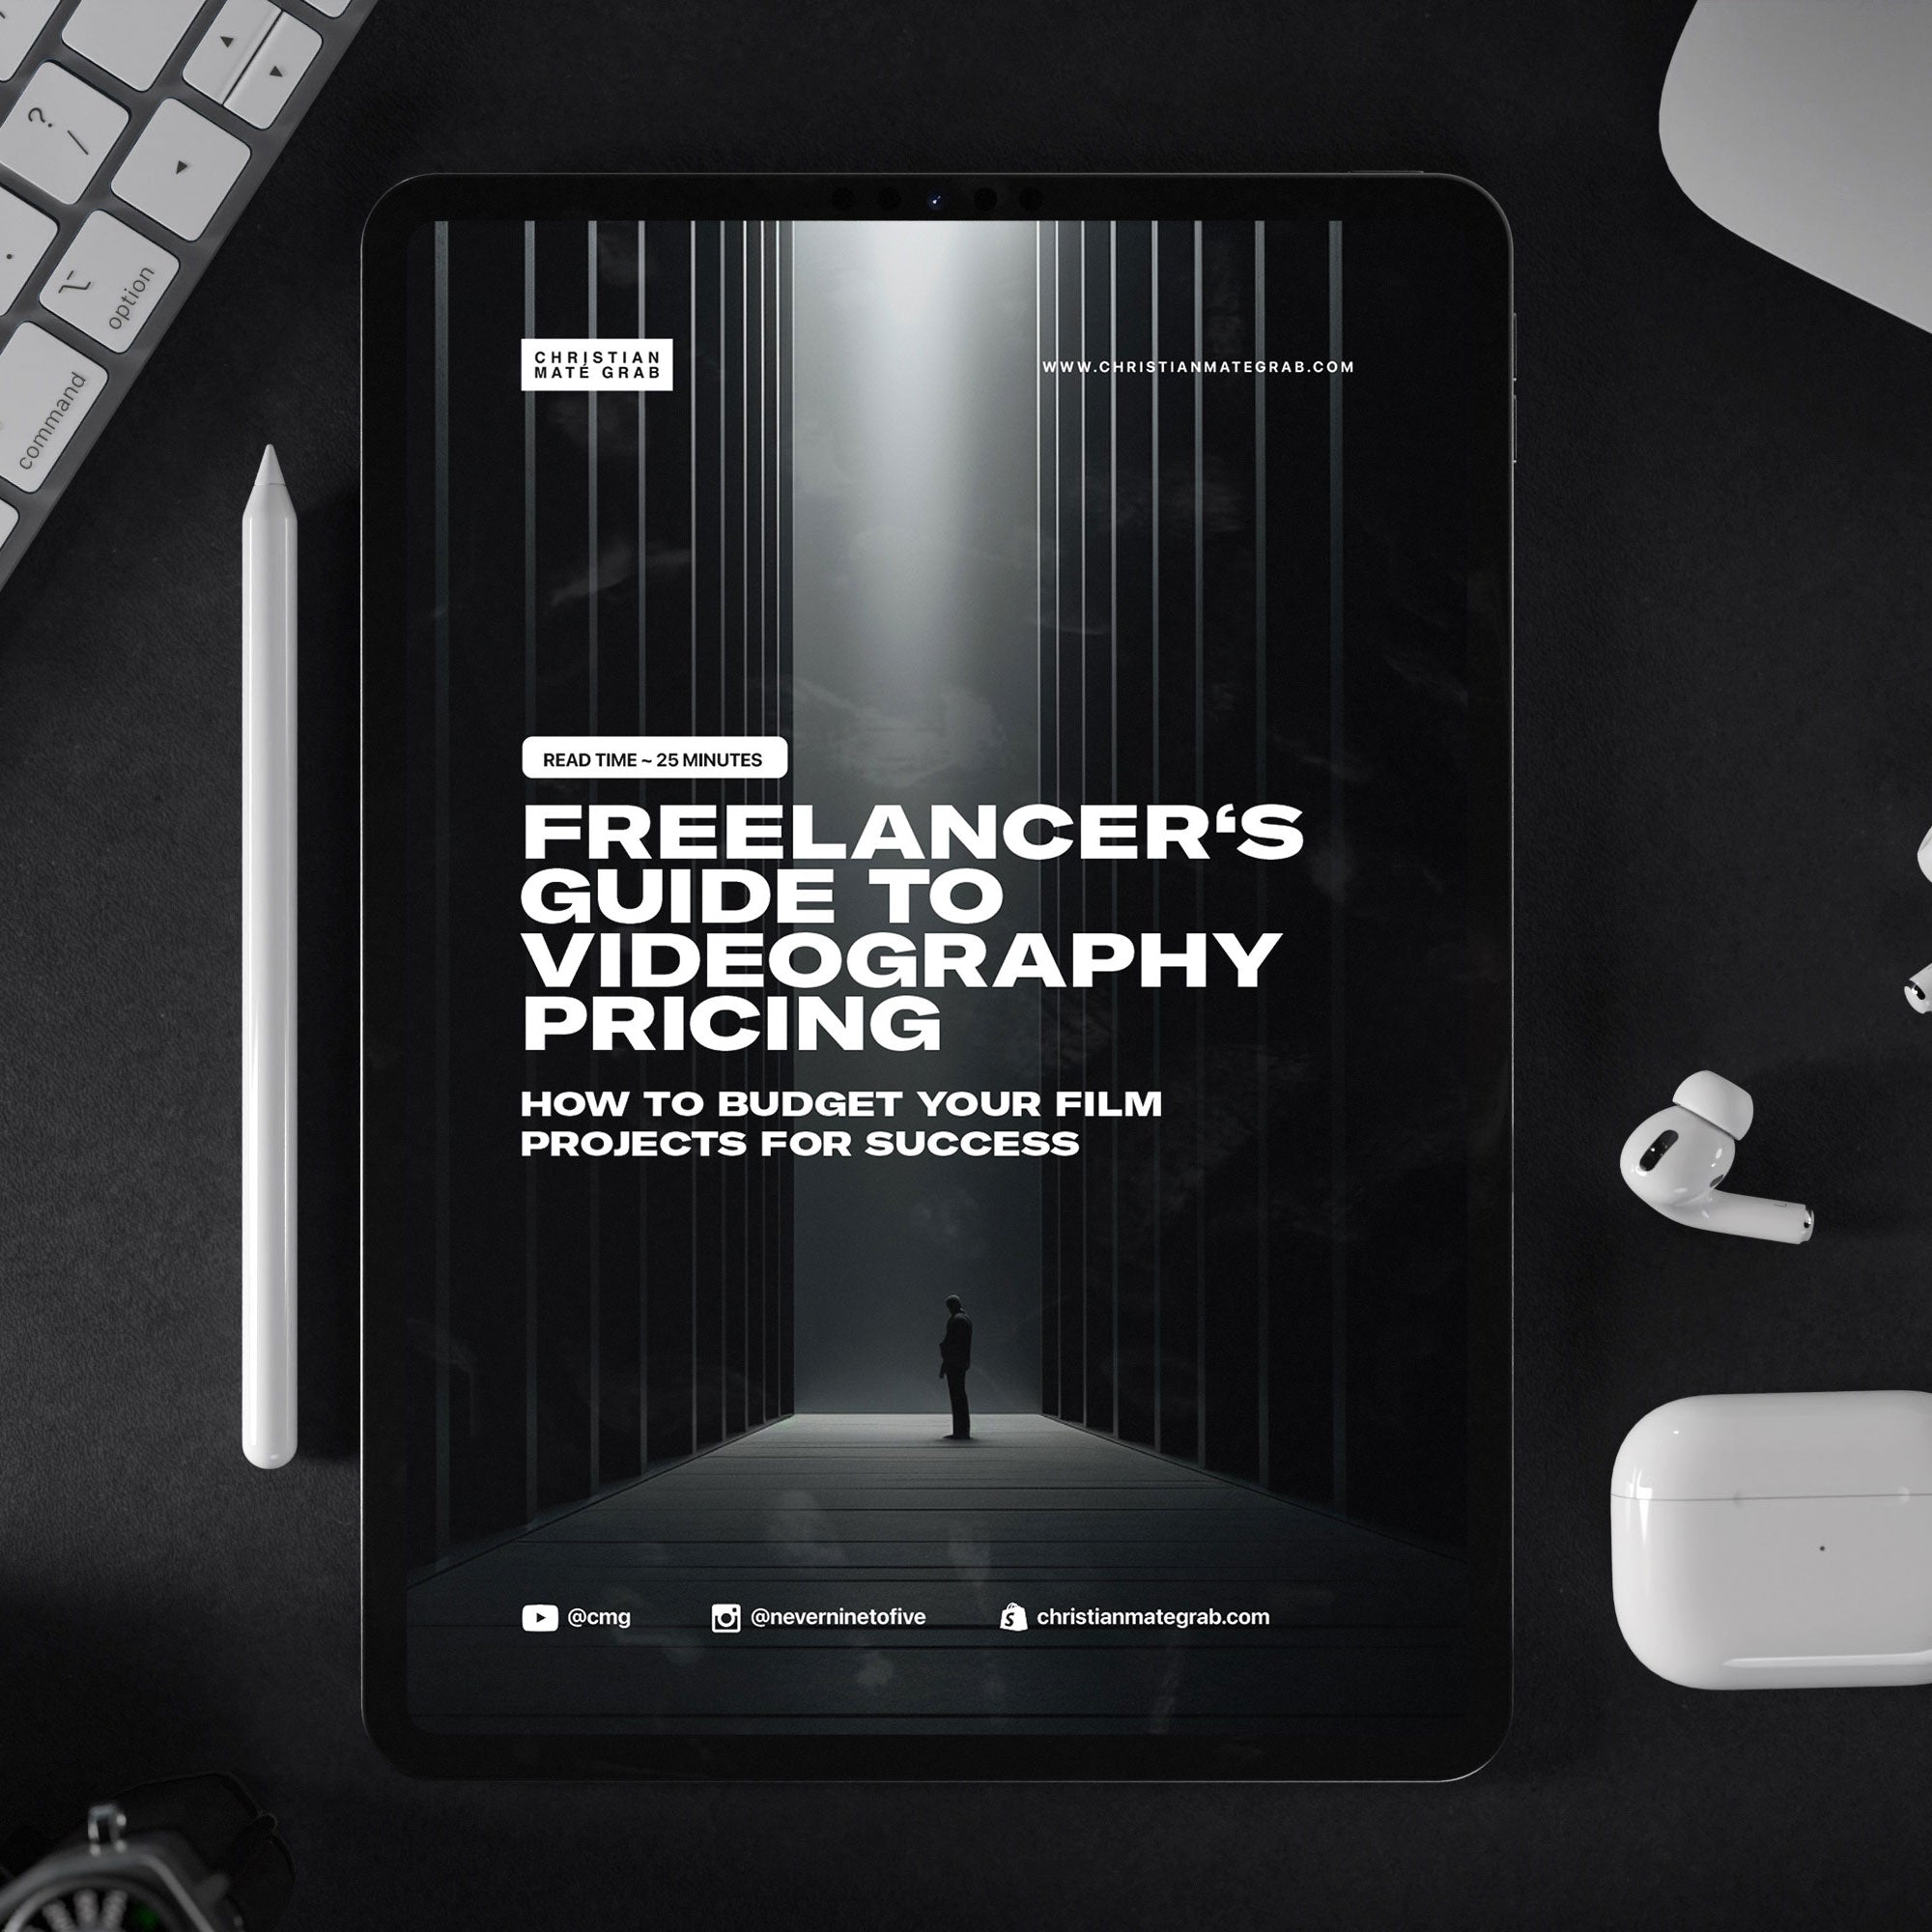 Freelancer's Guide to Videography Pricing